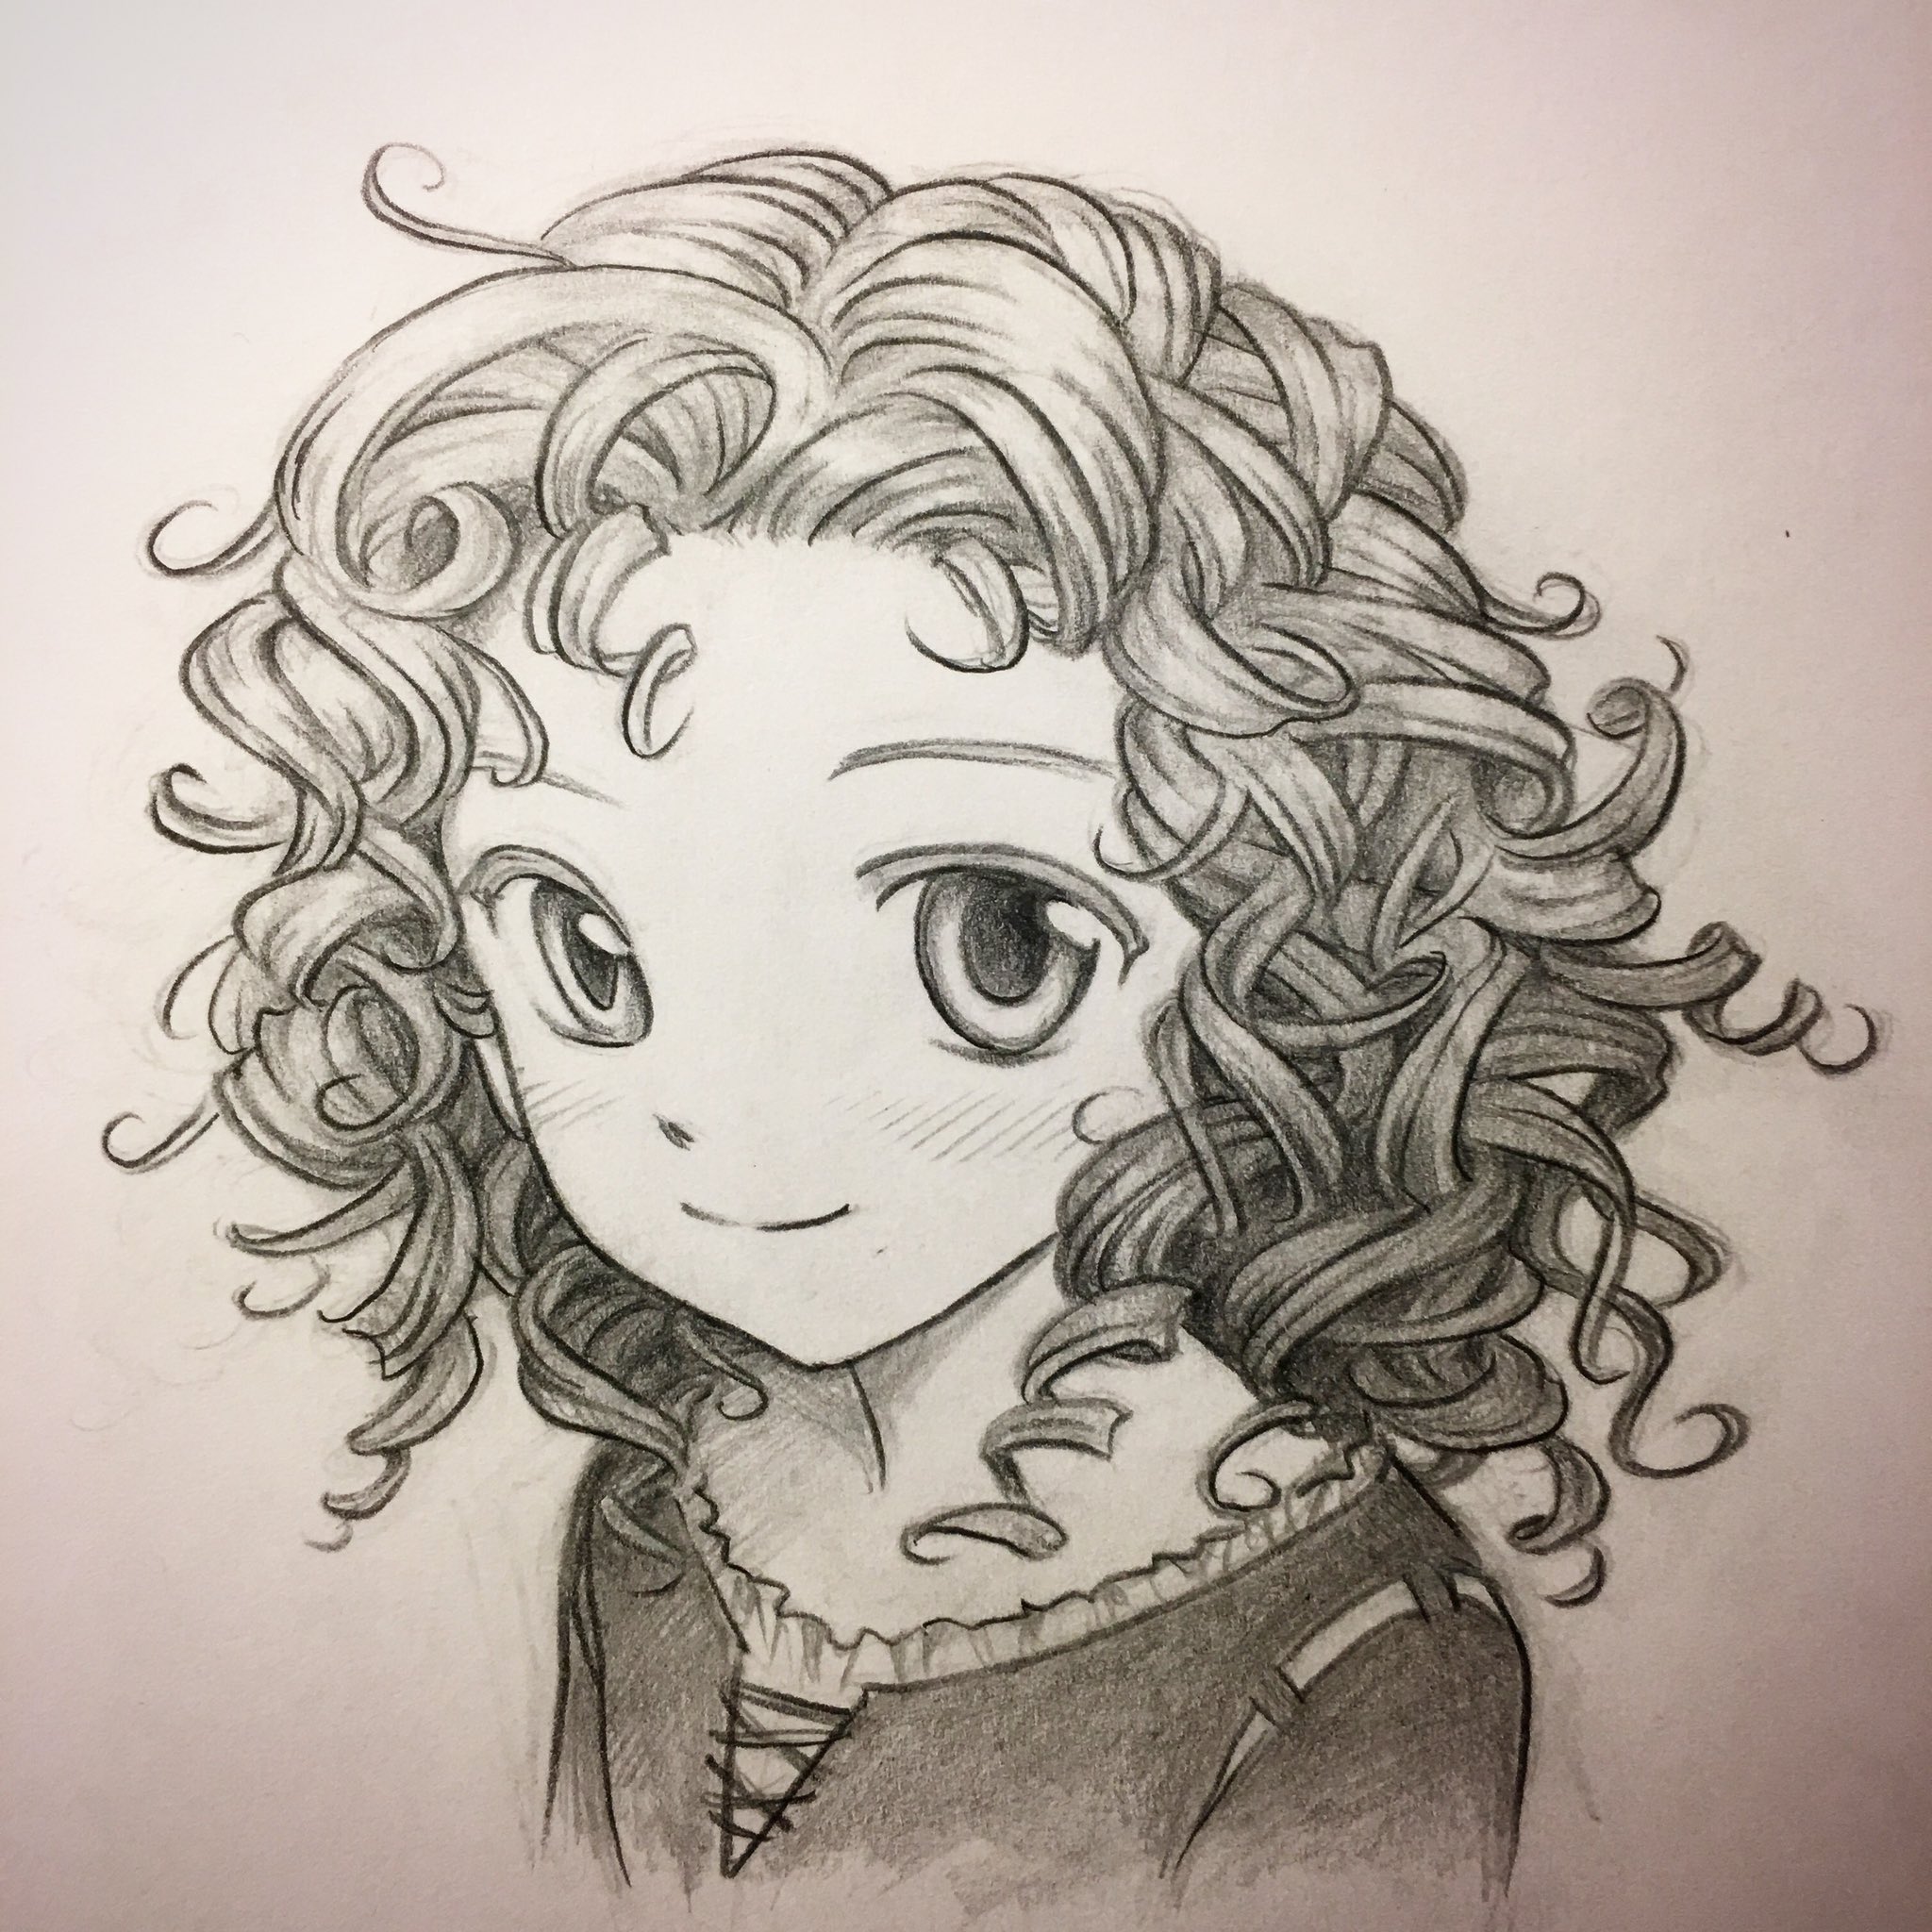 pencil sketch of an anime girl with a curly hair